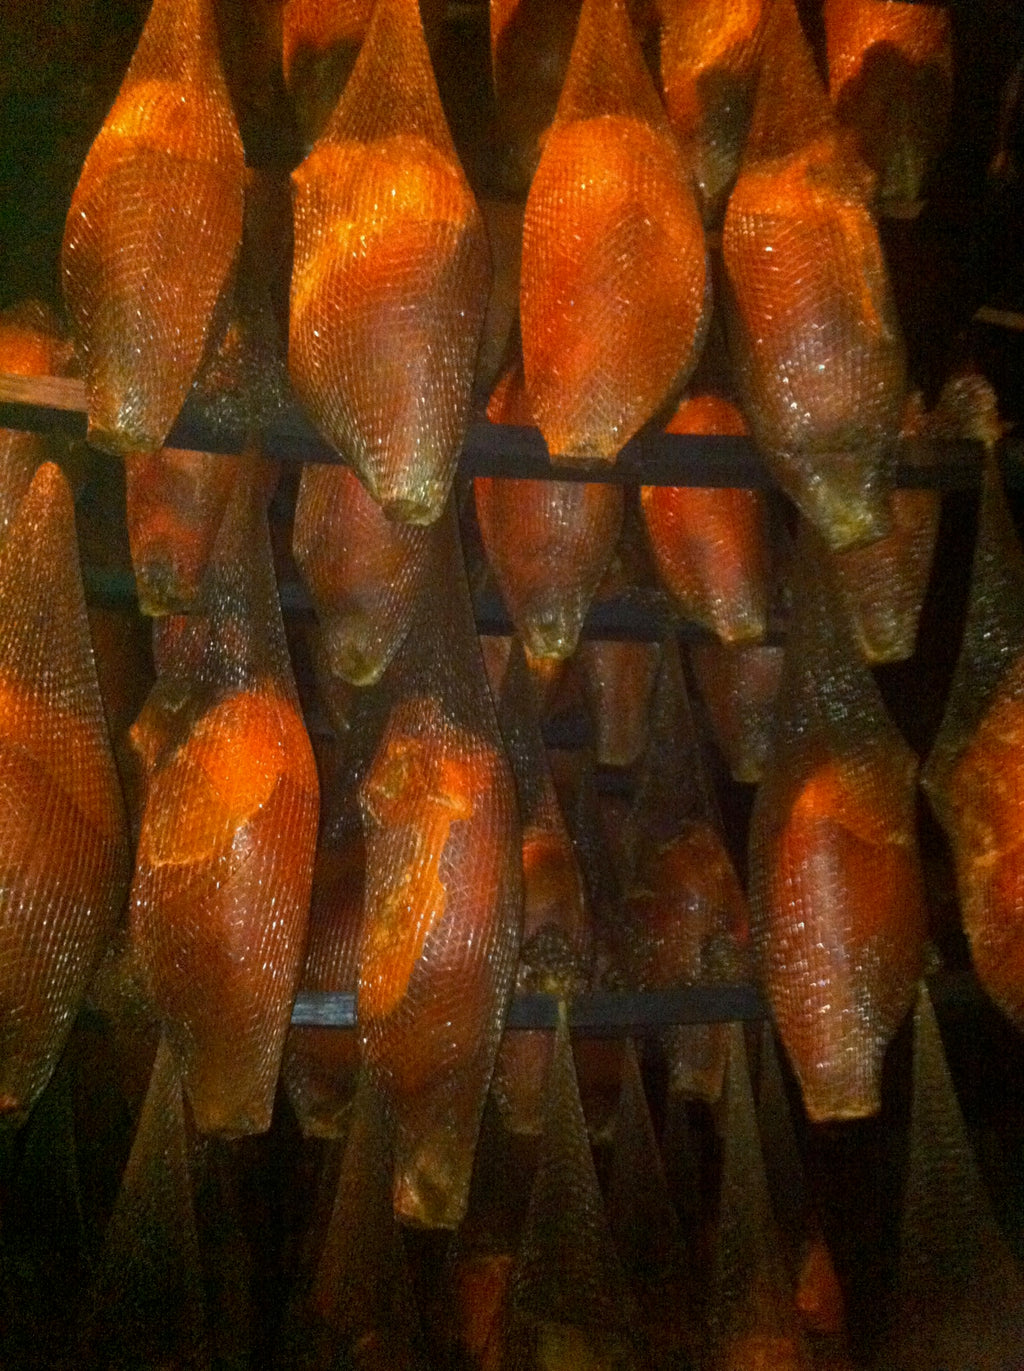 Father's Country Hams Aging in our Smoke House